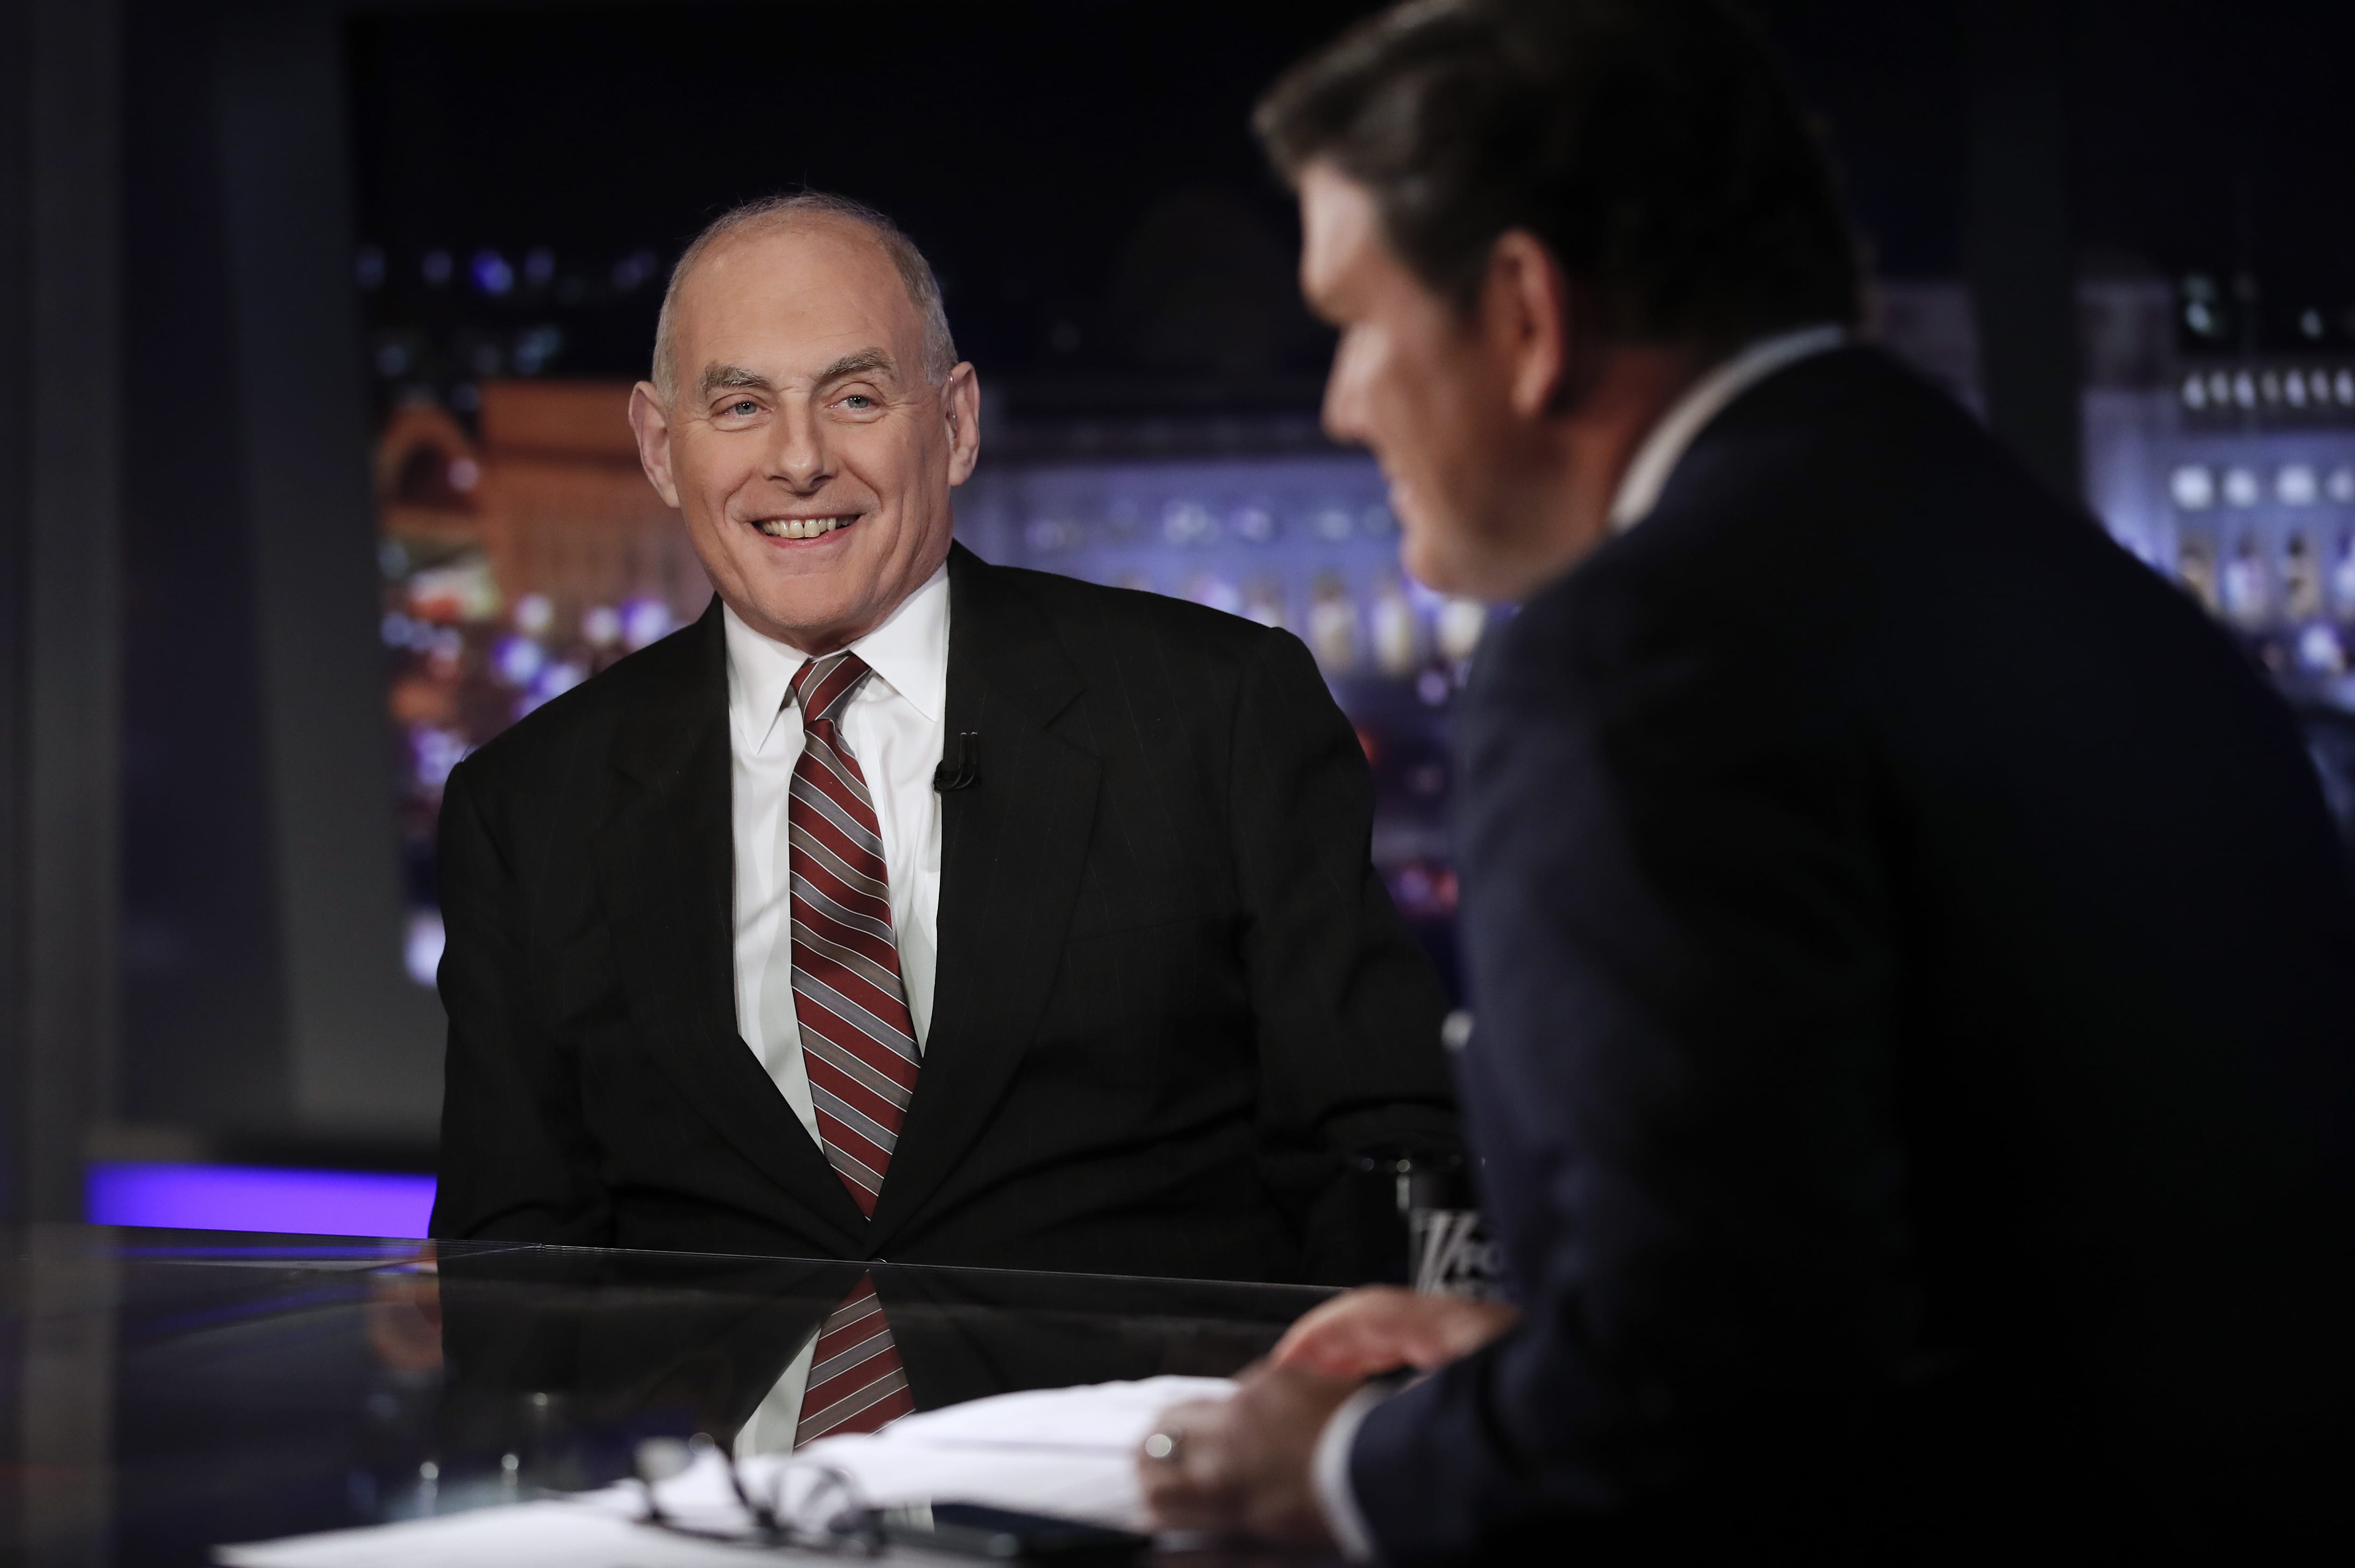 White House chief of staff John Kelly appears on Special Report with Bret Baier on Fox News in Washington, Wednesday, Jan. 17, 2018. Kelly says Trump has evolved on many issues since the campaign. Kelly says in an interview with Baier that "there's been an evolutionary process that this president's gone through" on issues ranging from Afghanistan to his promised Southern border wall.